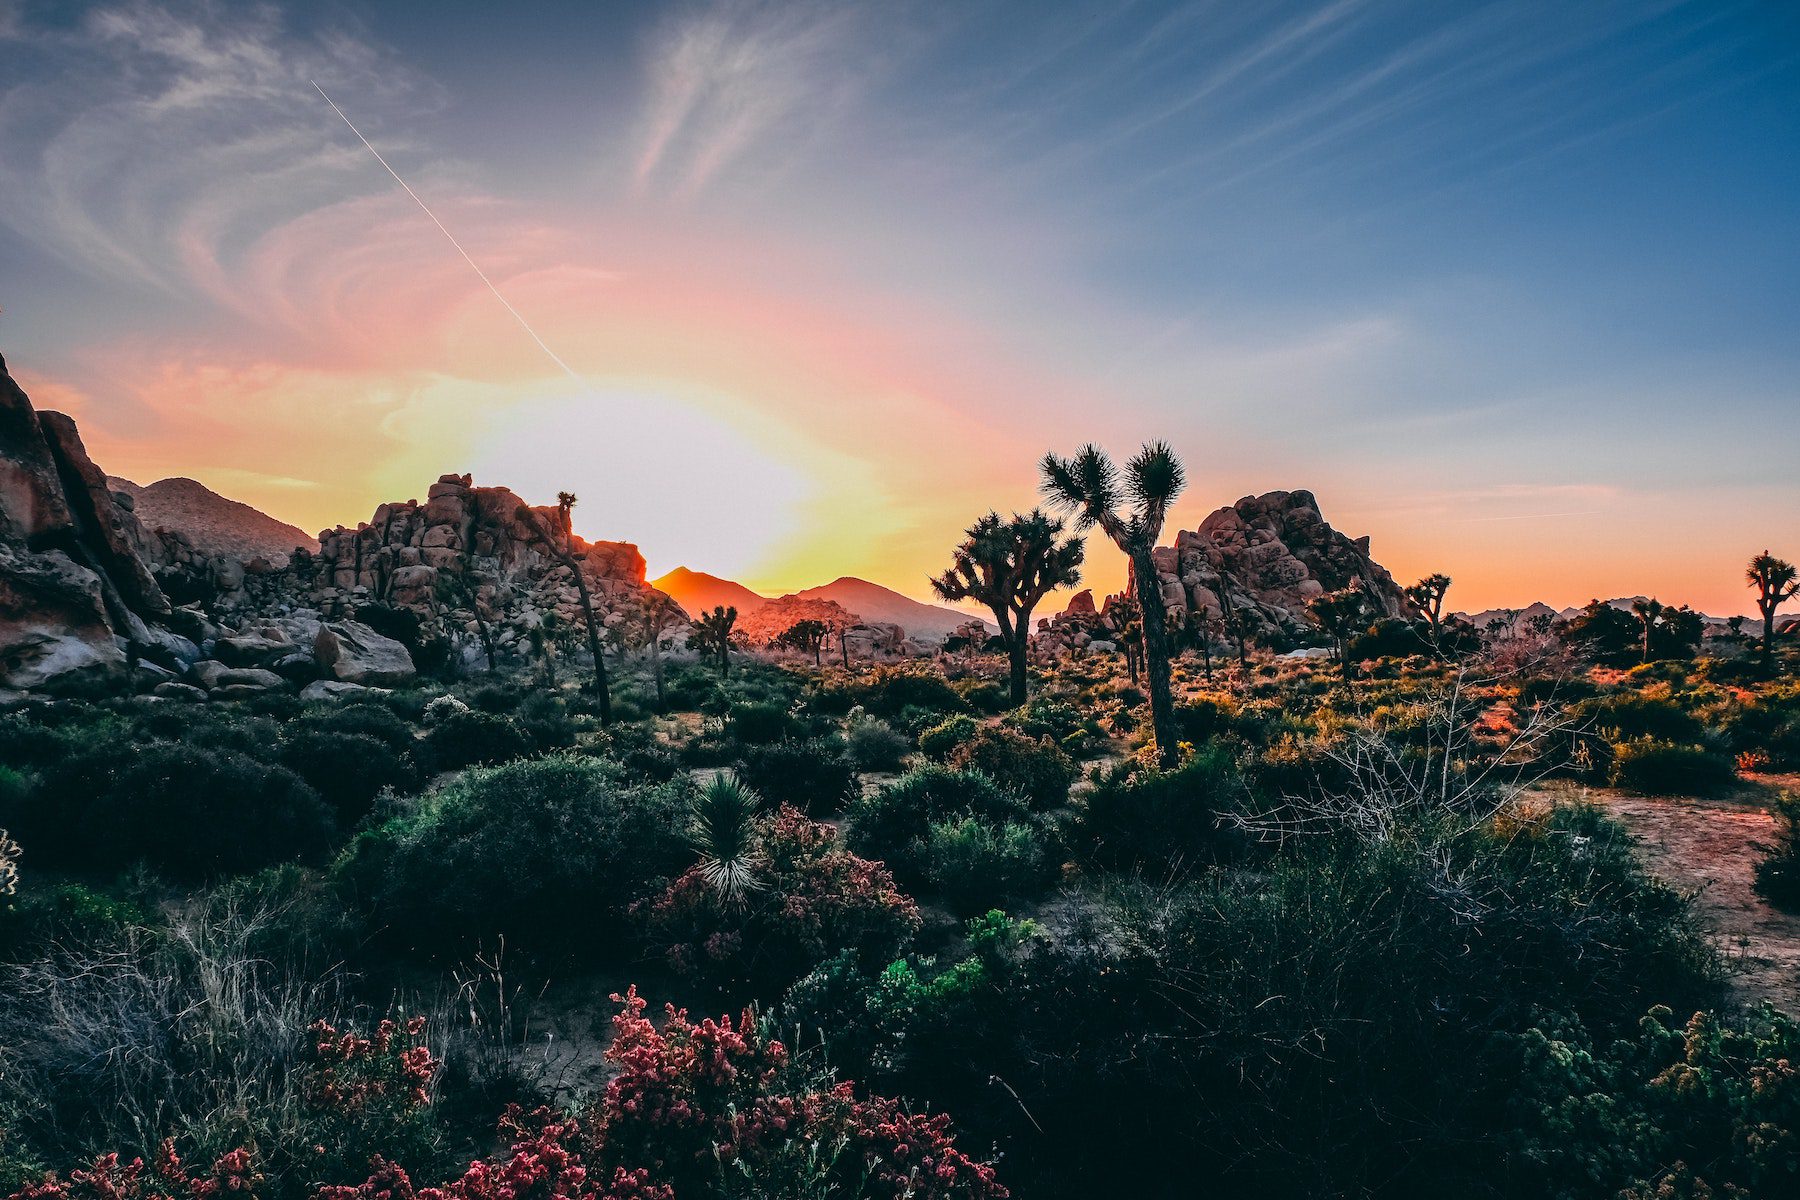 Stunning sunset over a field of Joshua Trees and desert plants in Joshua Tree National Park. 